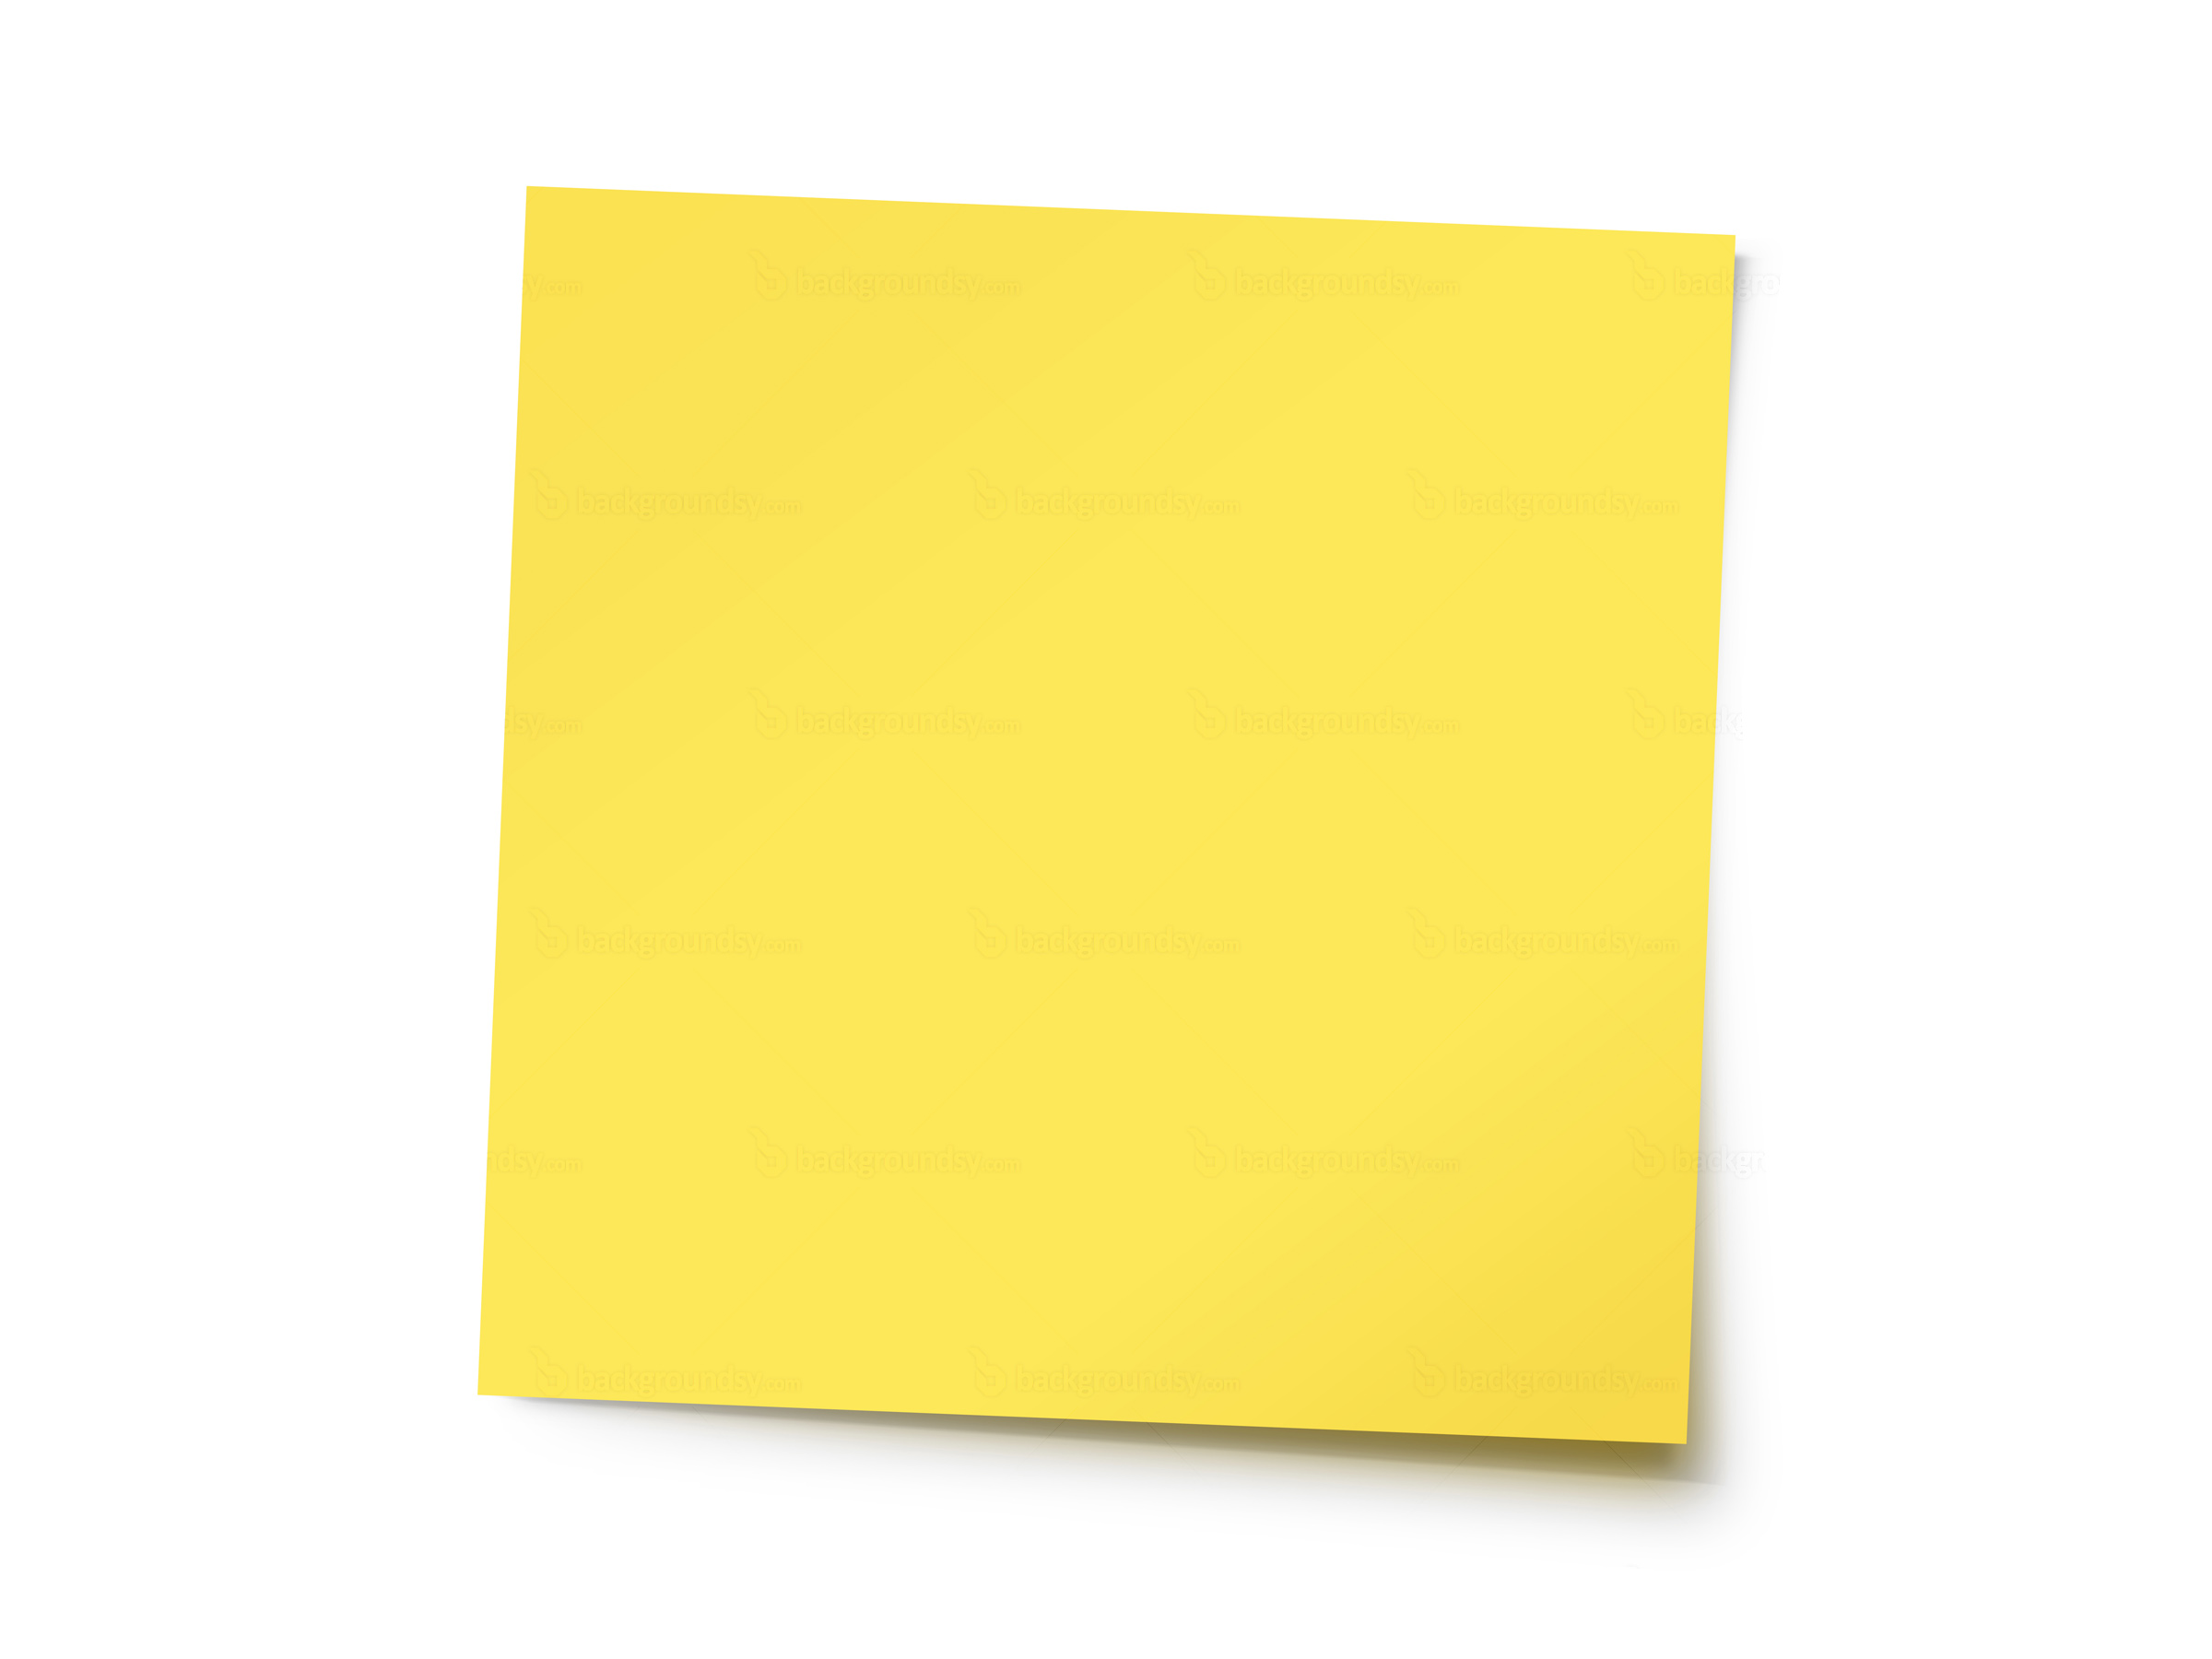 Post It Note PNGs for Free Download